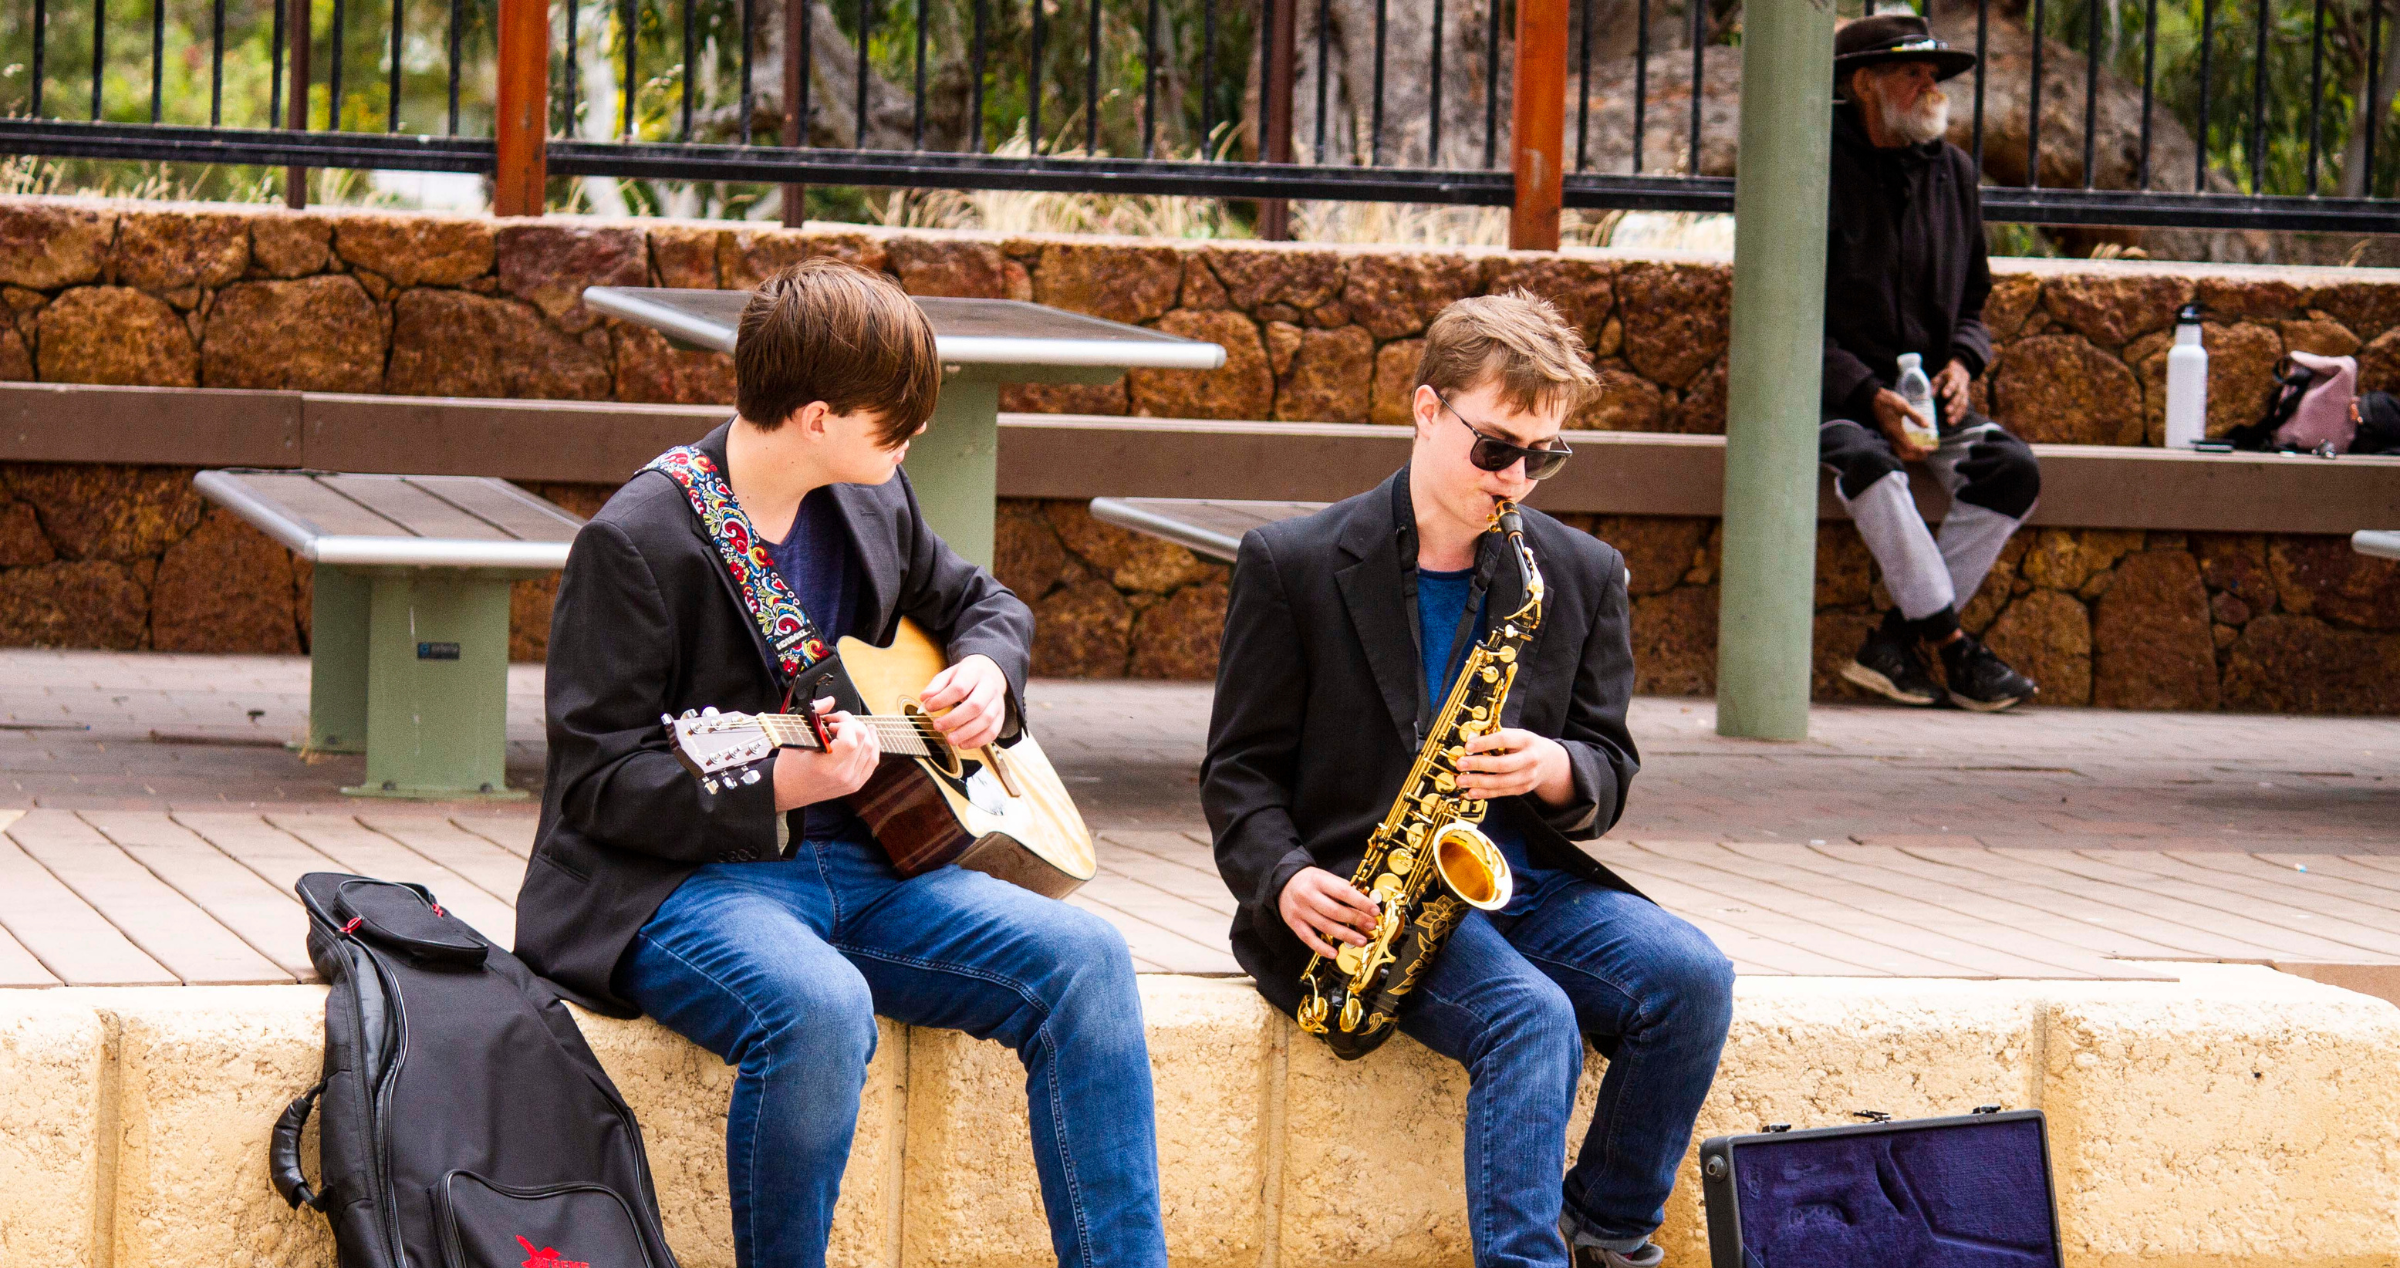 Image of Cody playing saxophone alongside his friend